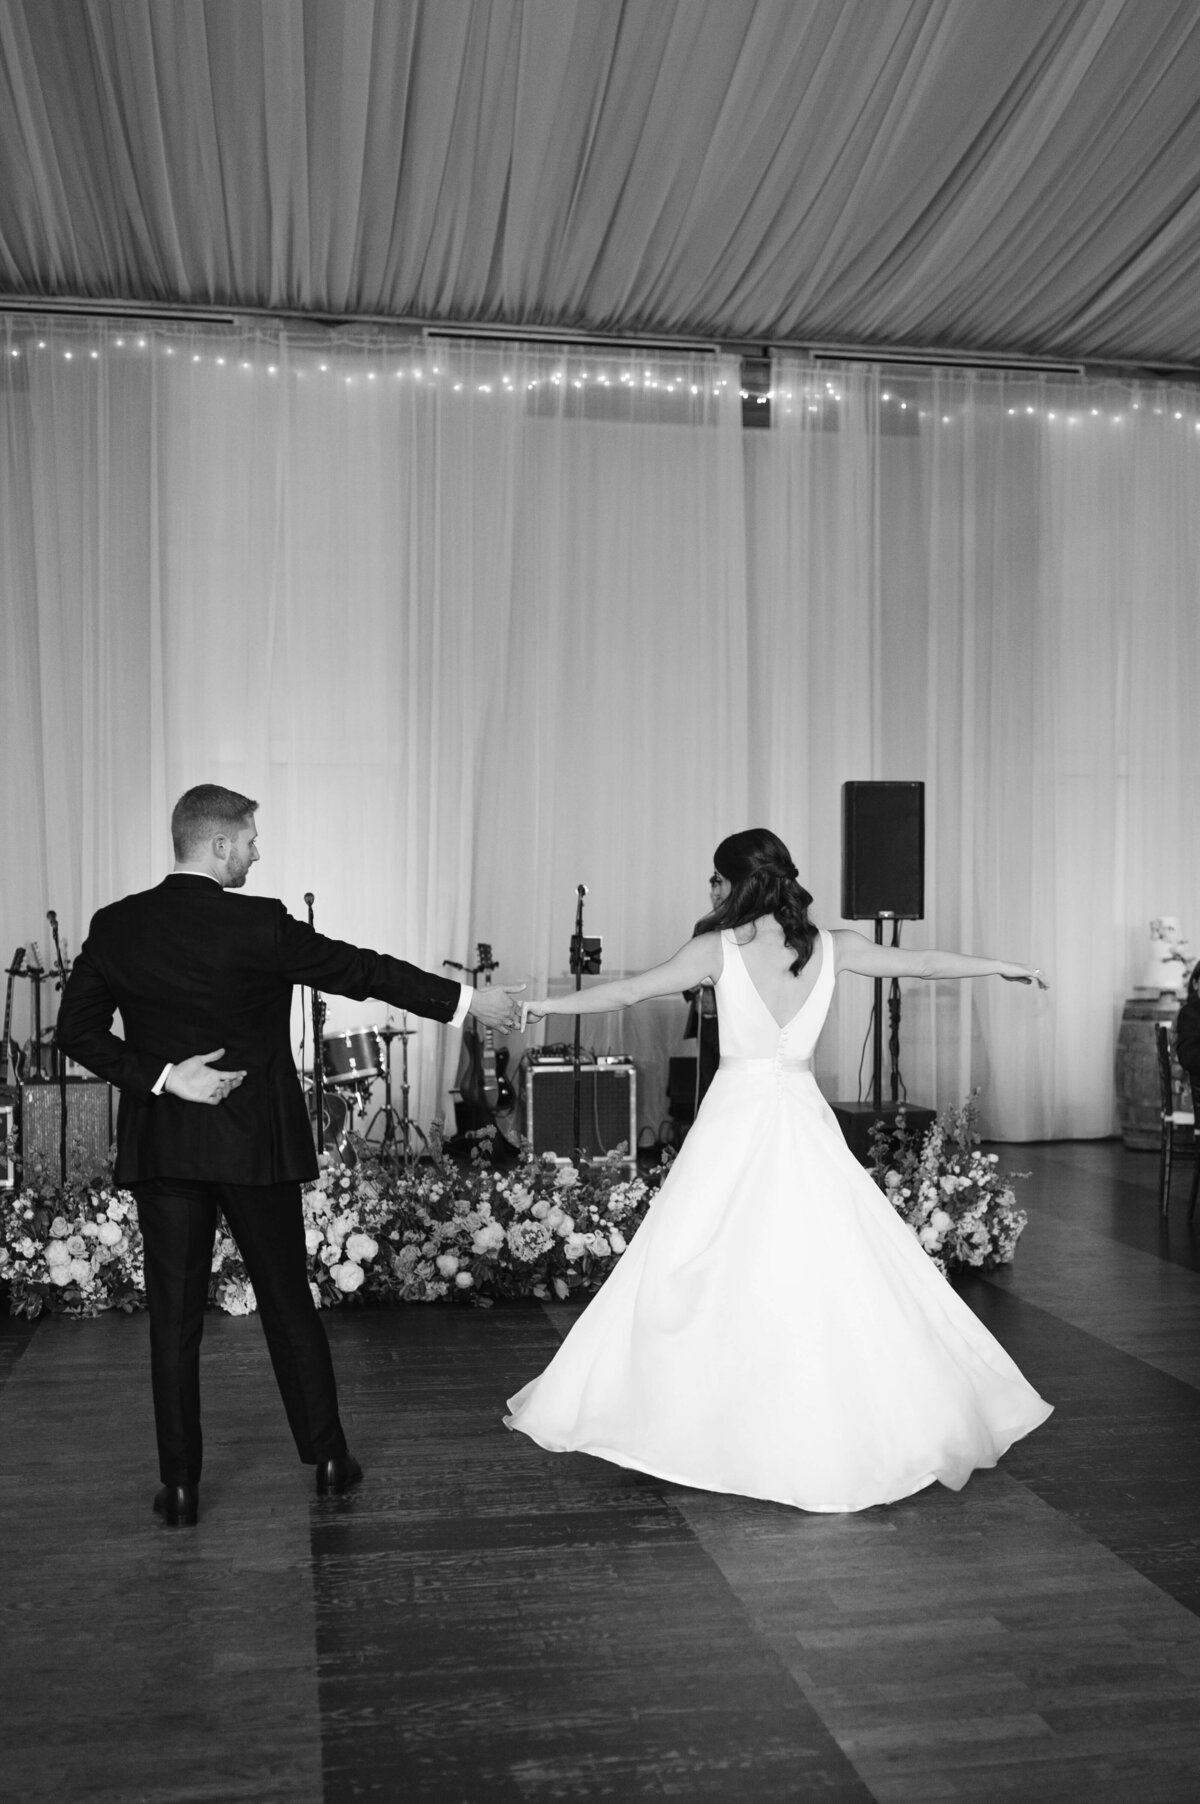 B&W image of couple dancing first dance during reception.